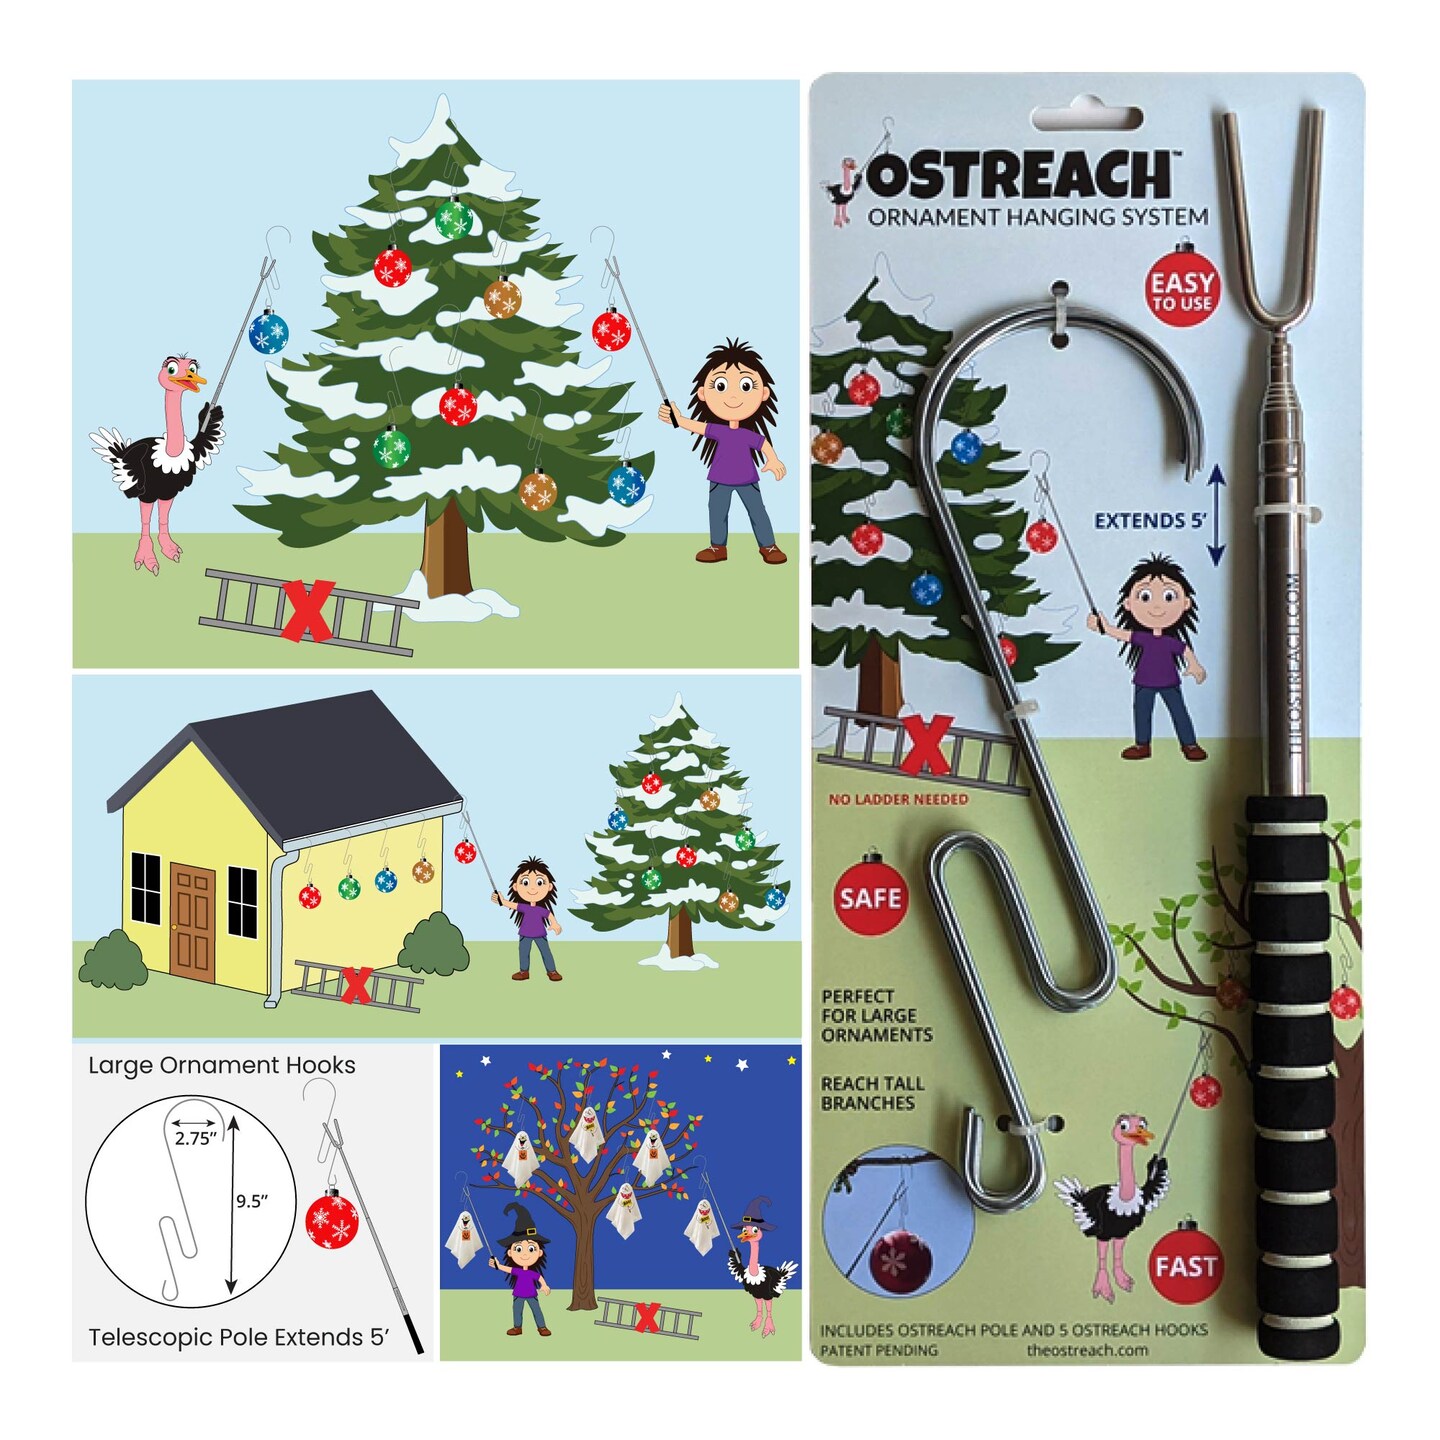 Ostreach Ornament Hanging System Ornament Hooks Ornament Hangers Christmas Tree Hangers Christmas Tree Hooks Metal Wire Ornament Hooks for Outdoor Trees